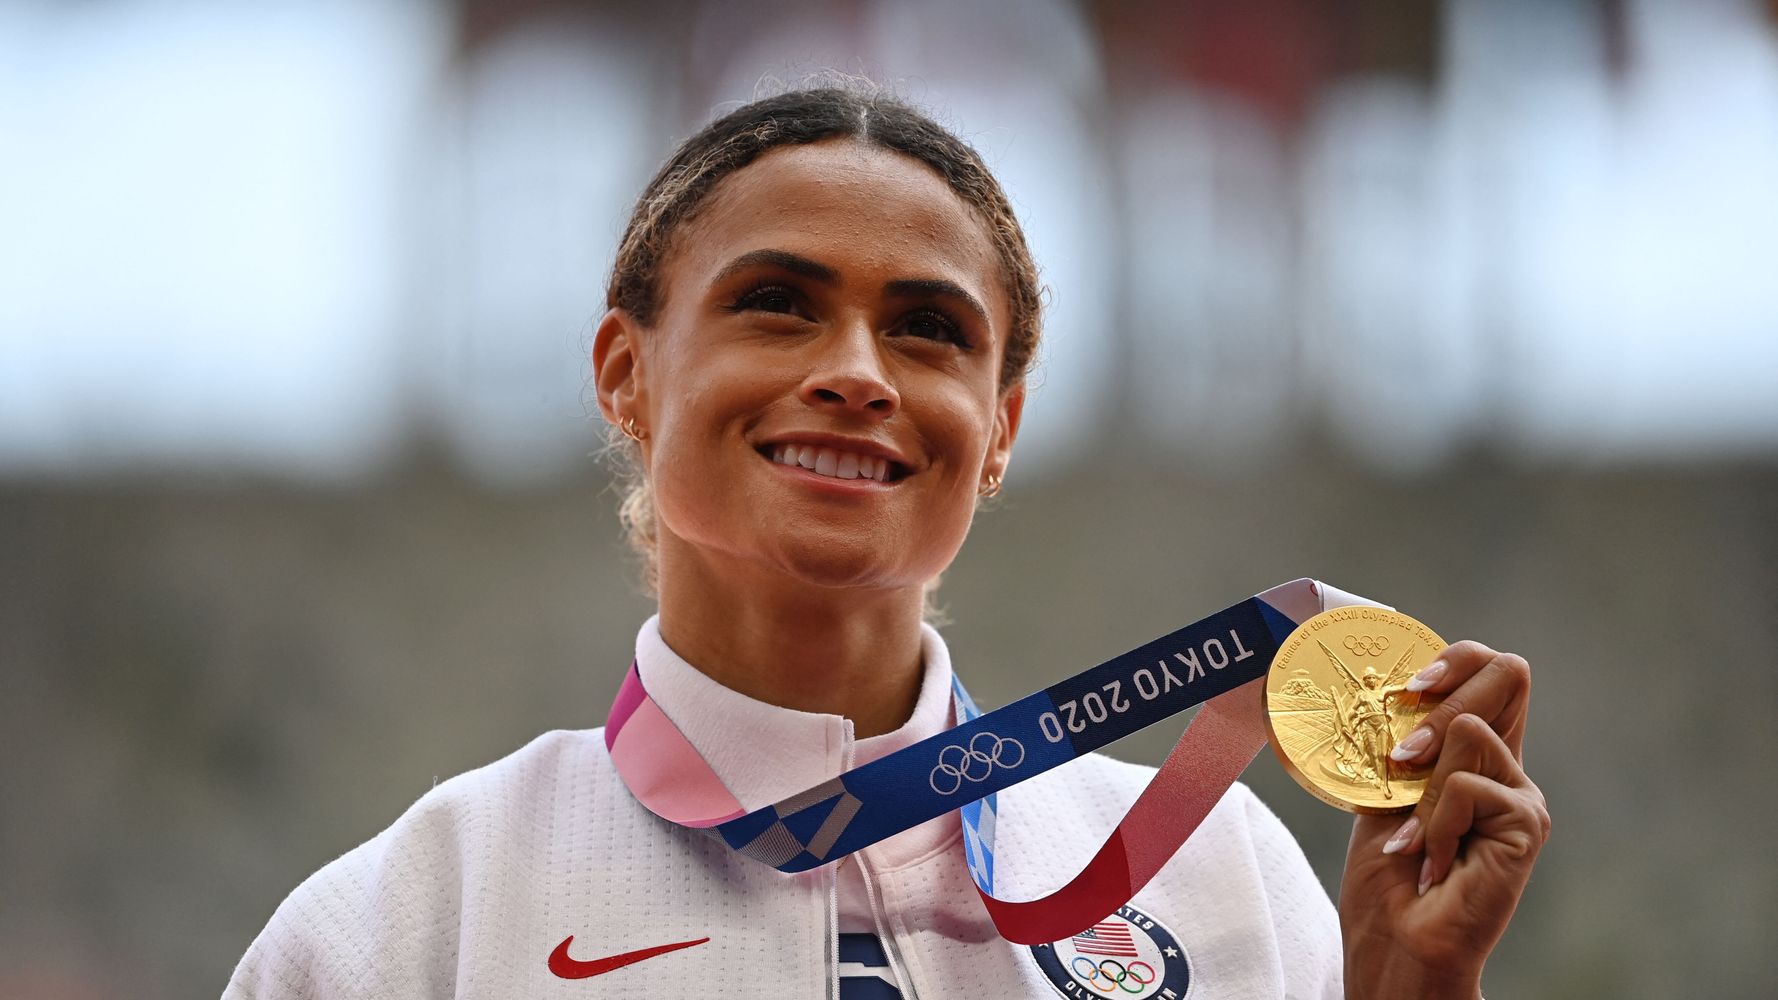 Sydney McLaughlin Breaks World Record As She Races To Victory In 400-Meter Hurdles